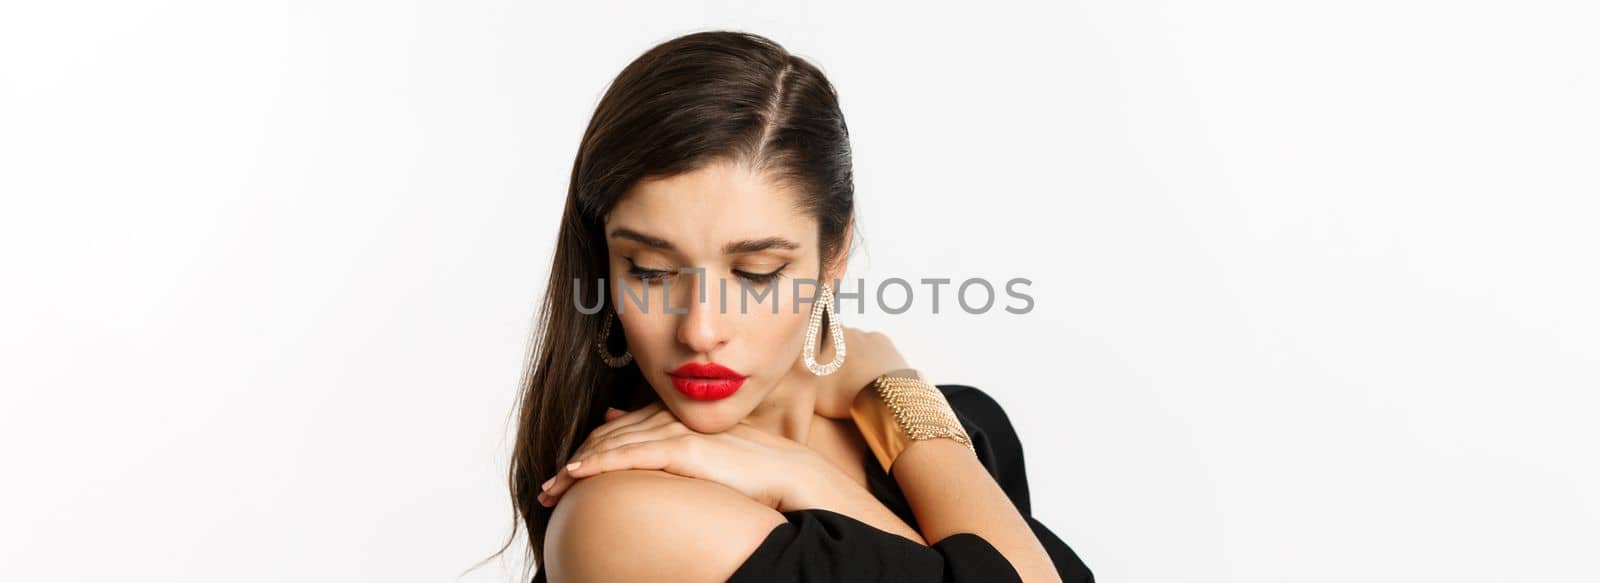 Fashion and beauty concept. Close-up of sensual woman in elegant earrings and black dress, wearing makeup with red lips, looking down tenderly, standing over white background by Benzoix